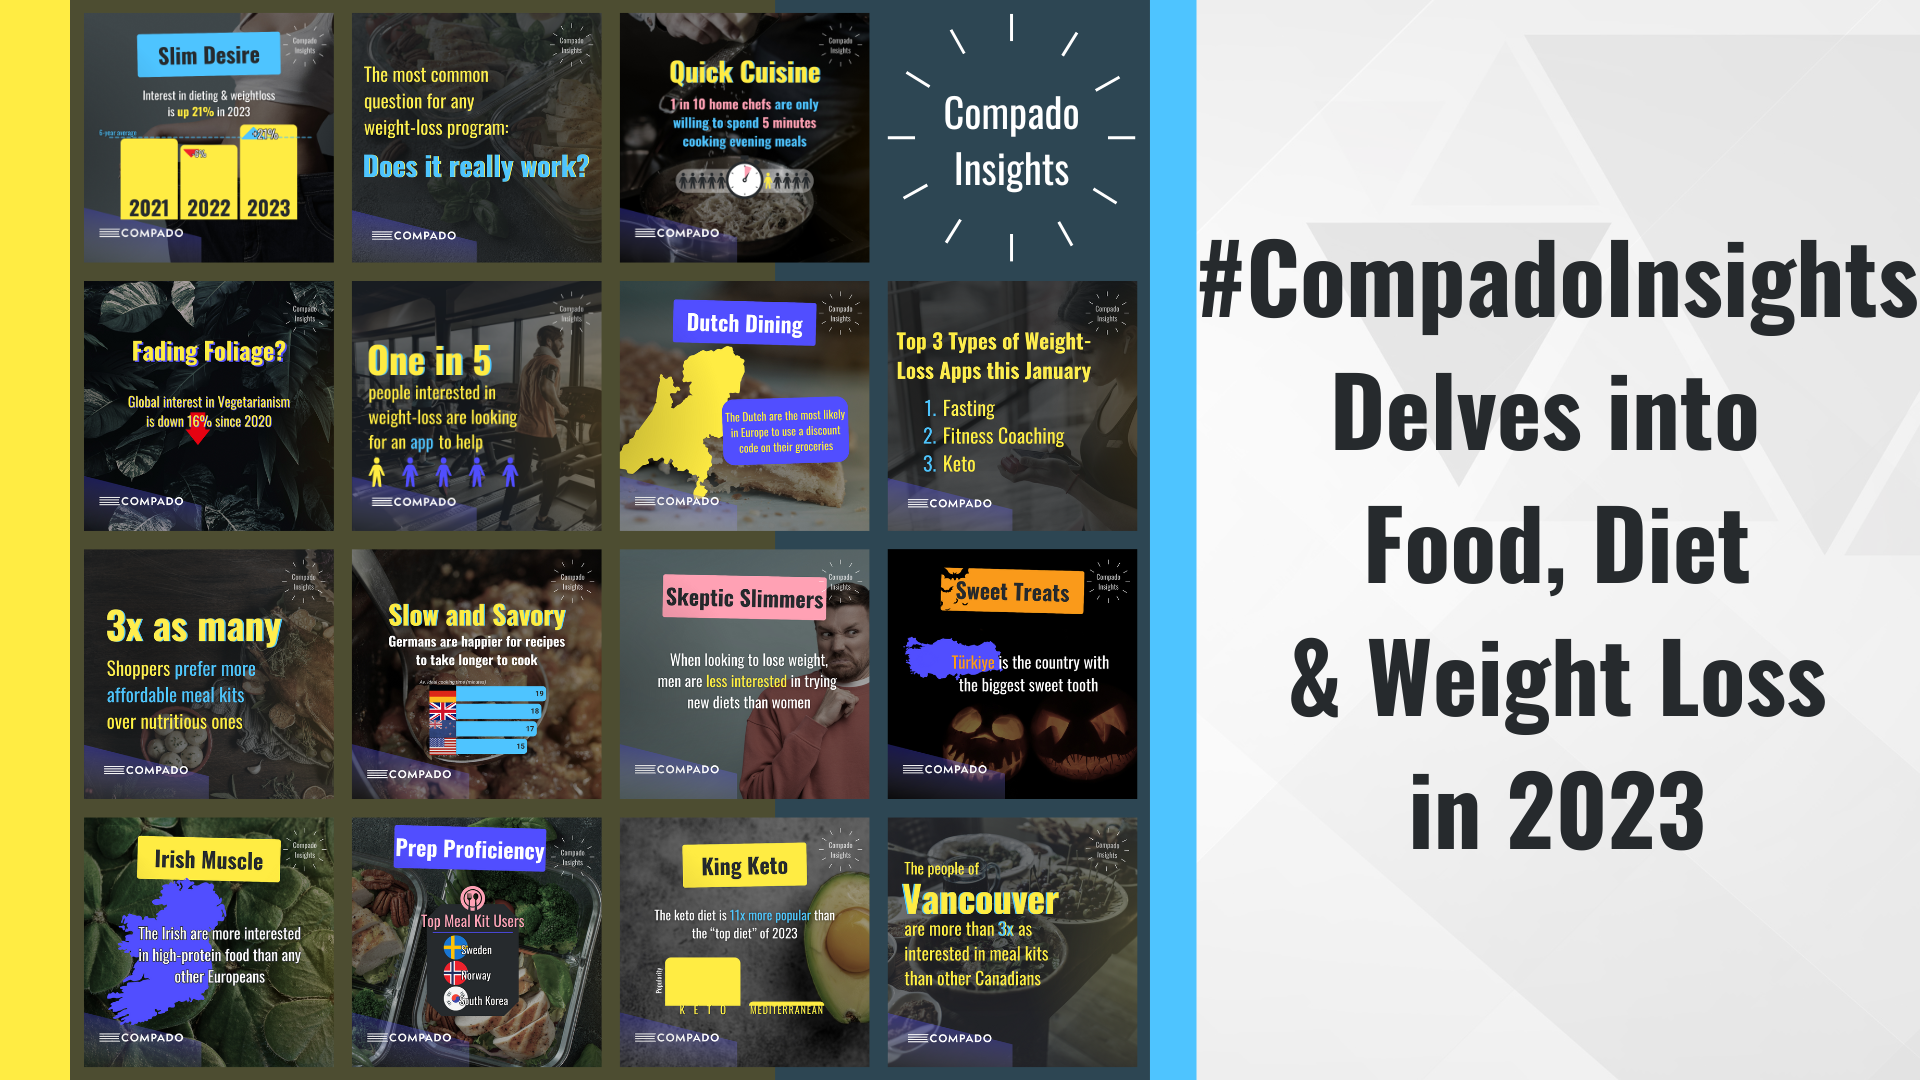 compado insights - food, diet & weight loss